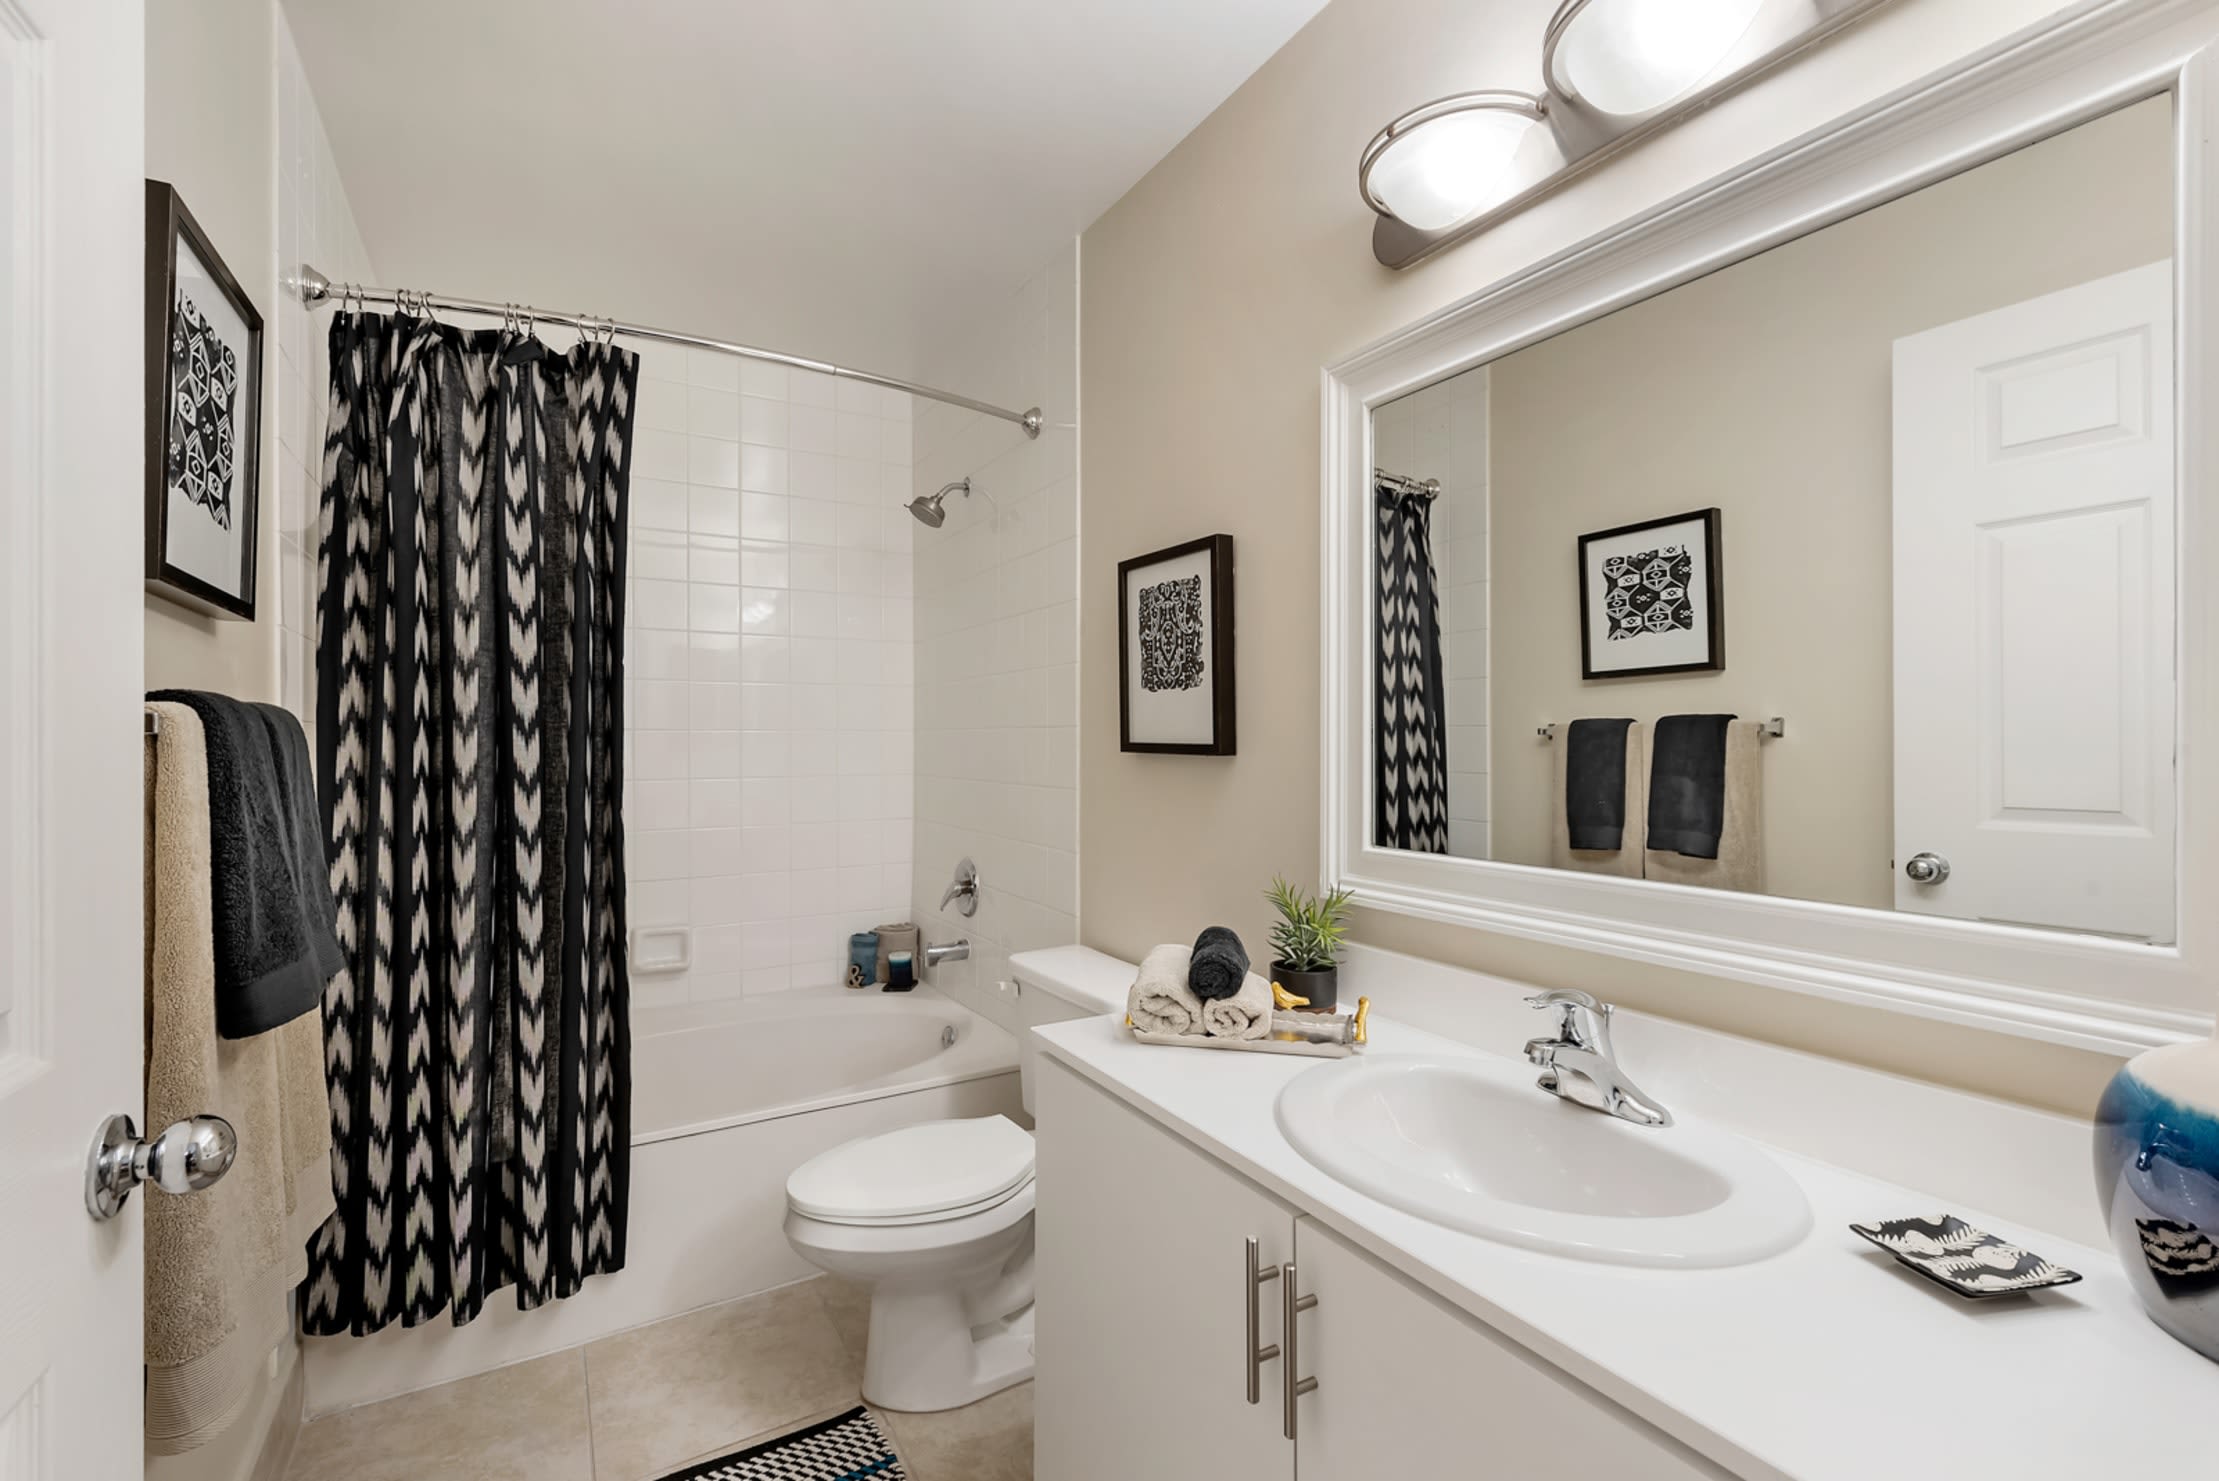 Bathroom with oversized vanity and tiled tub/shower combination at Fountain House Apartments in Miami Lakes, Florida